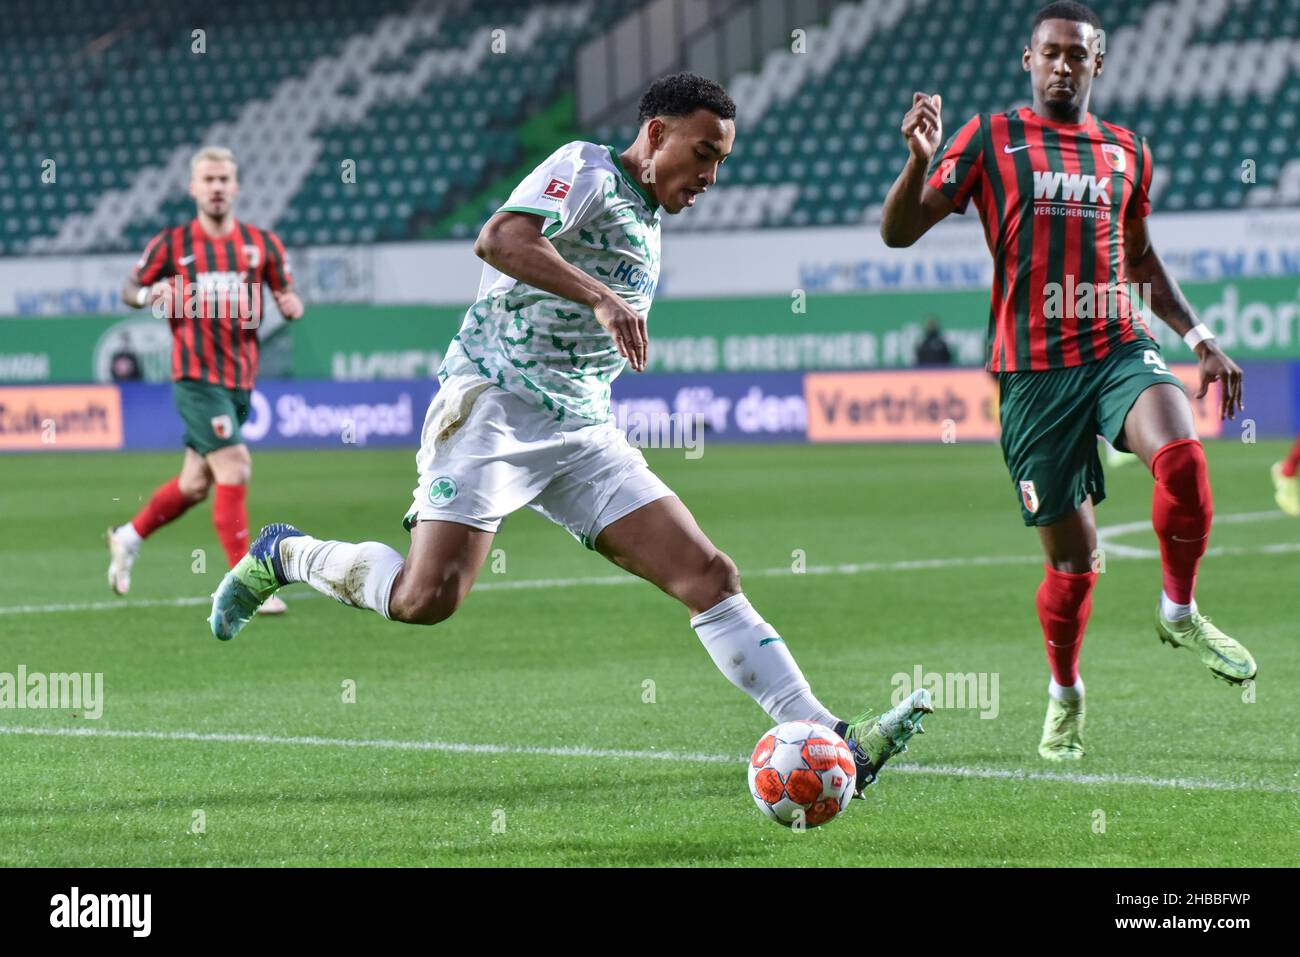 Fuerth, Germany. 18th Dec, 2021.  Fussball, 1.Bundesliga - SpVgg Greuther Fuerth vs. FC Augsburg  Image: (fLTR)  Jamie Leweling (SpVgg Greuther Fürth,40), Reece Oxford (FC Augsburg, 4)  DFL regulations prohibit any use of photographs as image sequences and or quasi-video Credit: Ryan Evans/Alamy Live News Stock Photo